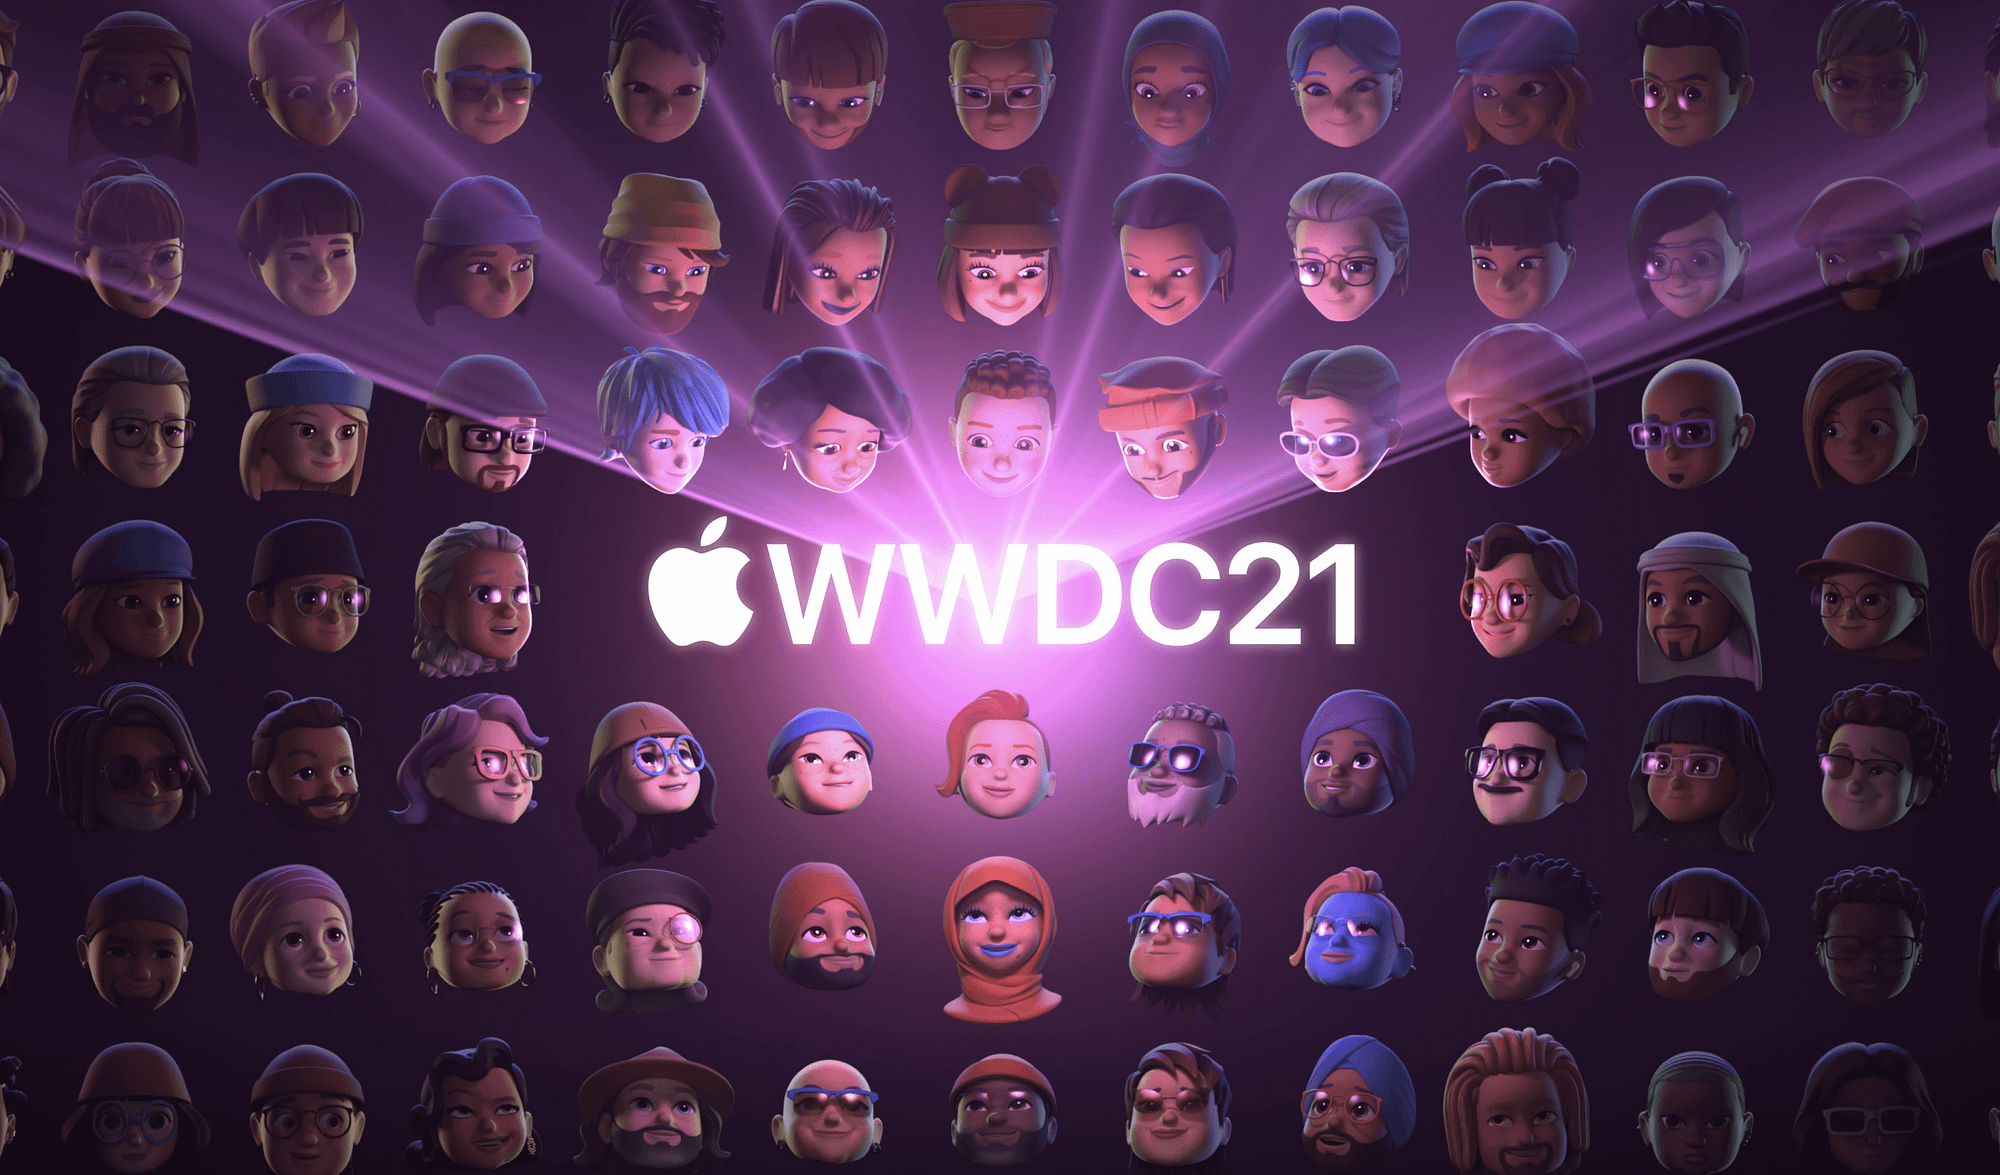 WWDC21 conference event image witth many different people and logo in center